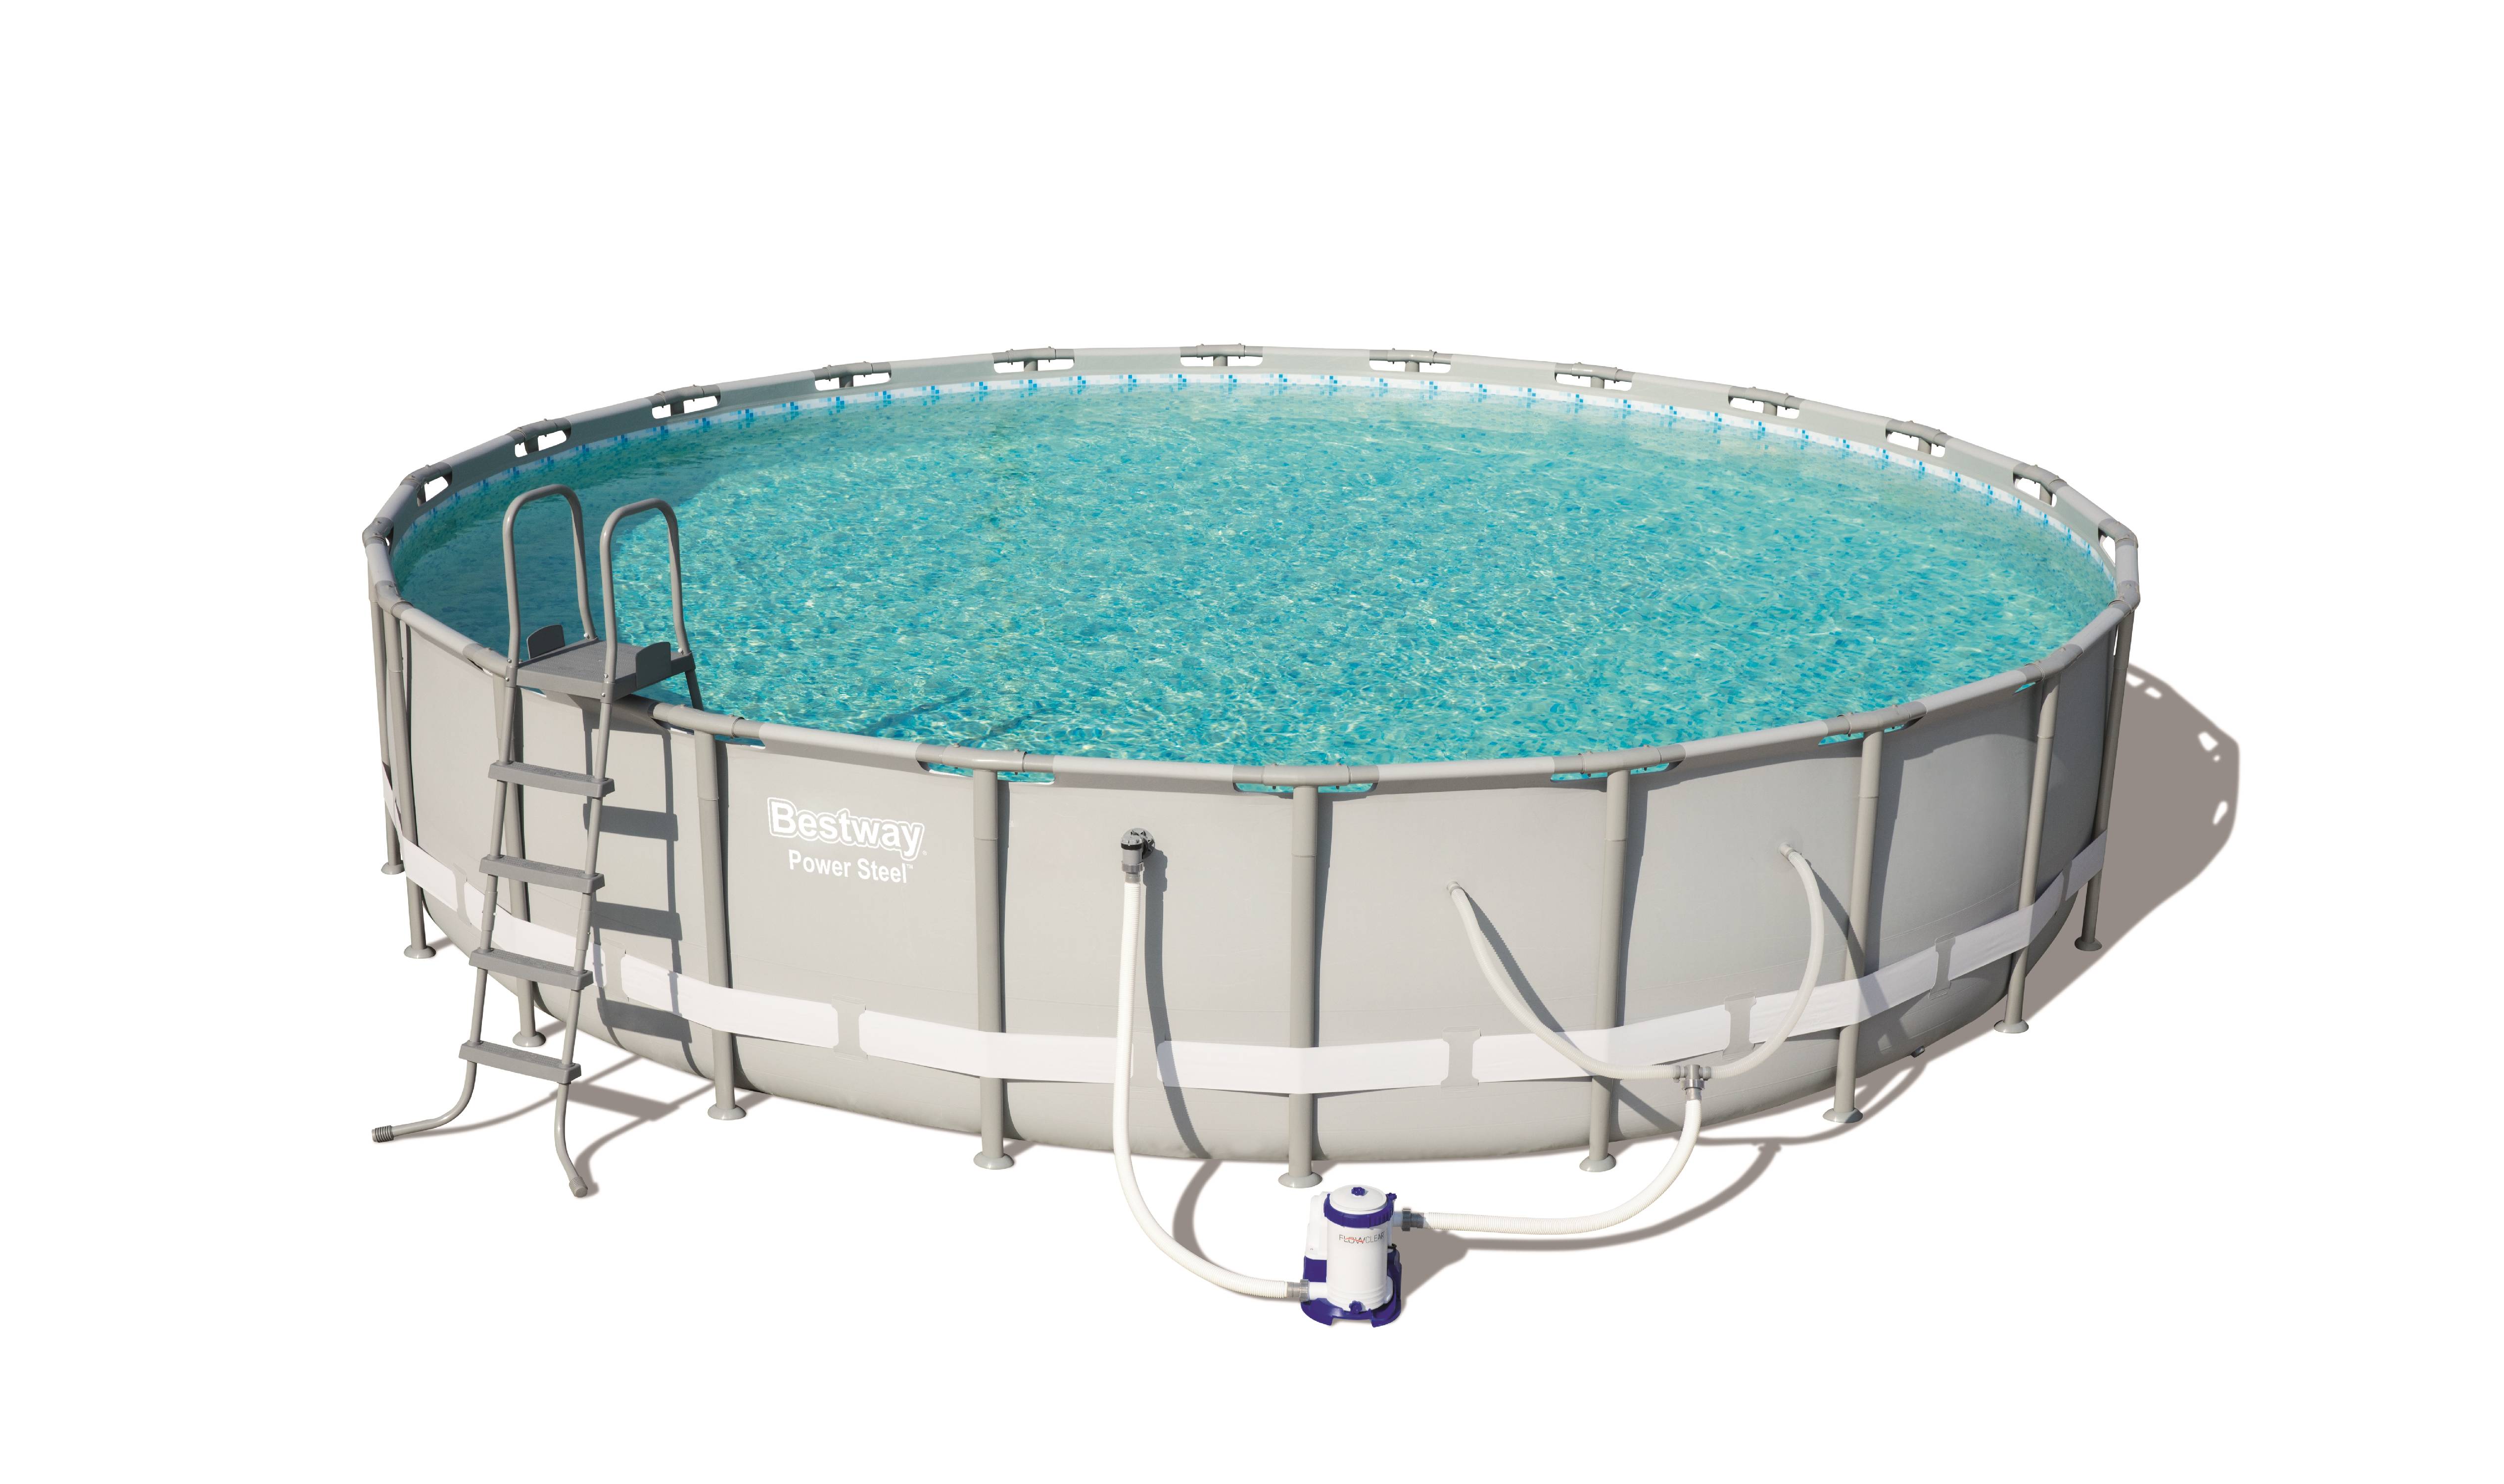 Bestway Power Steel 24′ x 52″ Frame Swimming Pool Set with Pump, Ladder and Cover